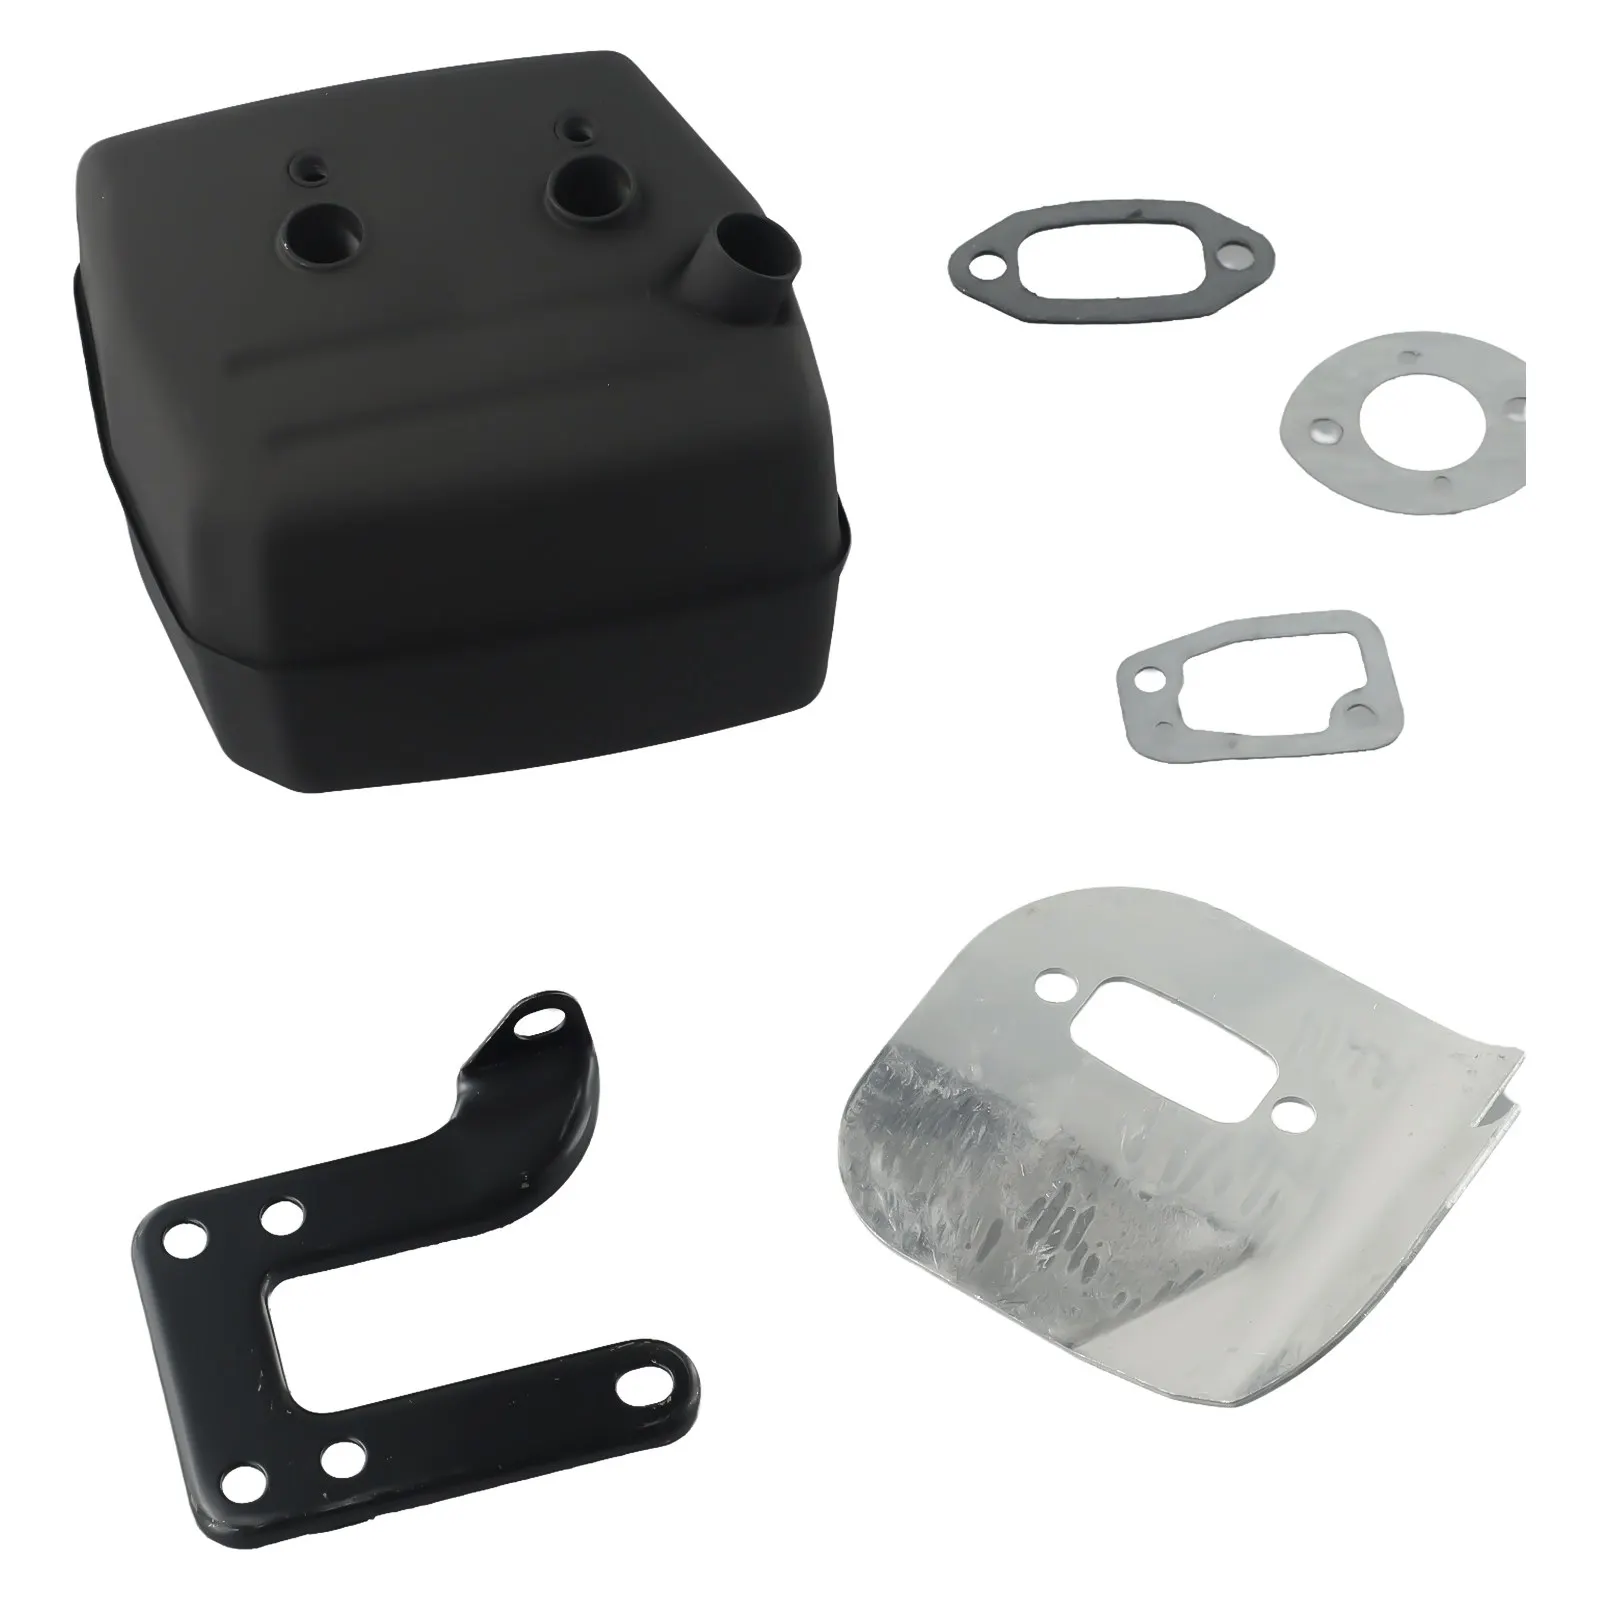 

Get Superior Performance with For Ported Exhaust Muffler Deflector Kit for 61 268 272 272XP 268K 272S Chainsaw